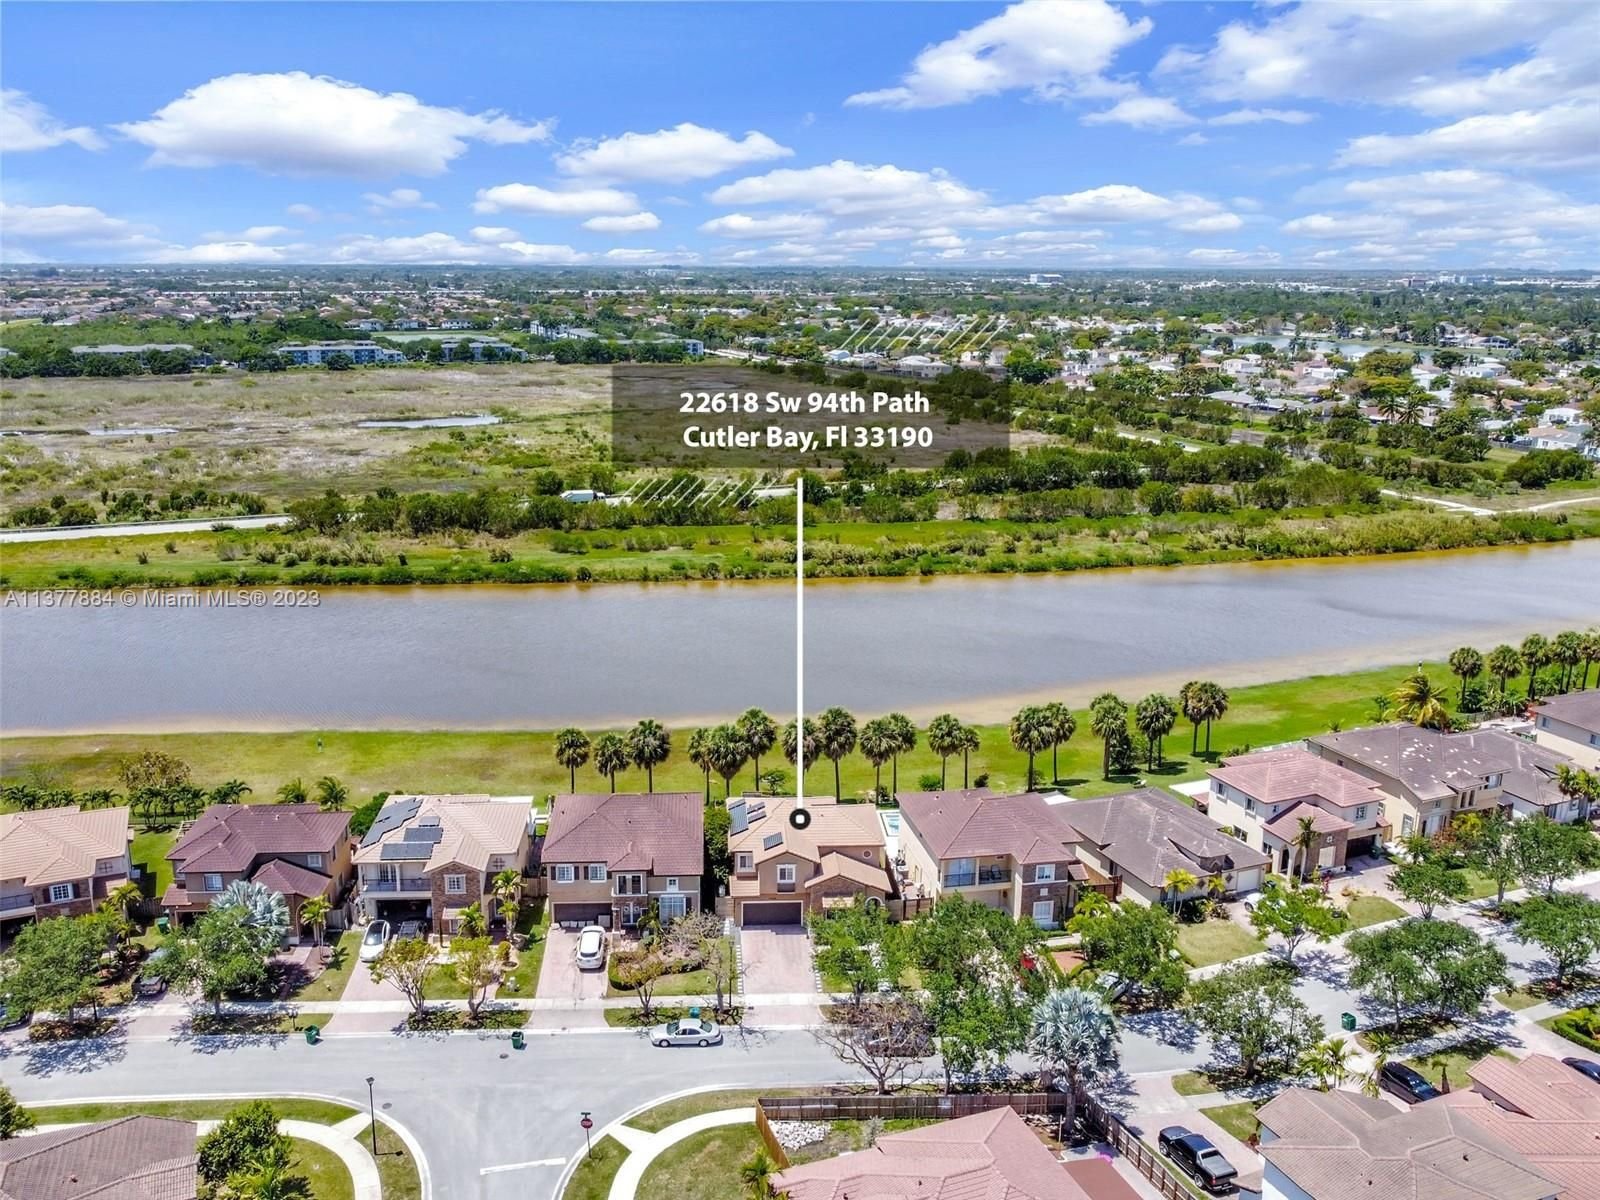 Real estate property located at 22618 94th Path, Miami-Dade County, Cutler Bay, FL